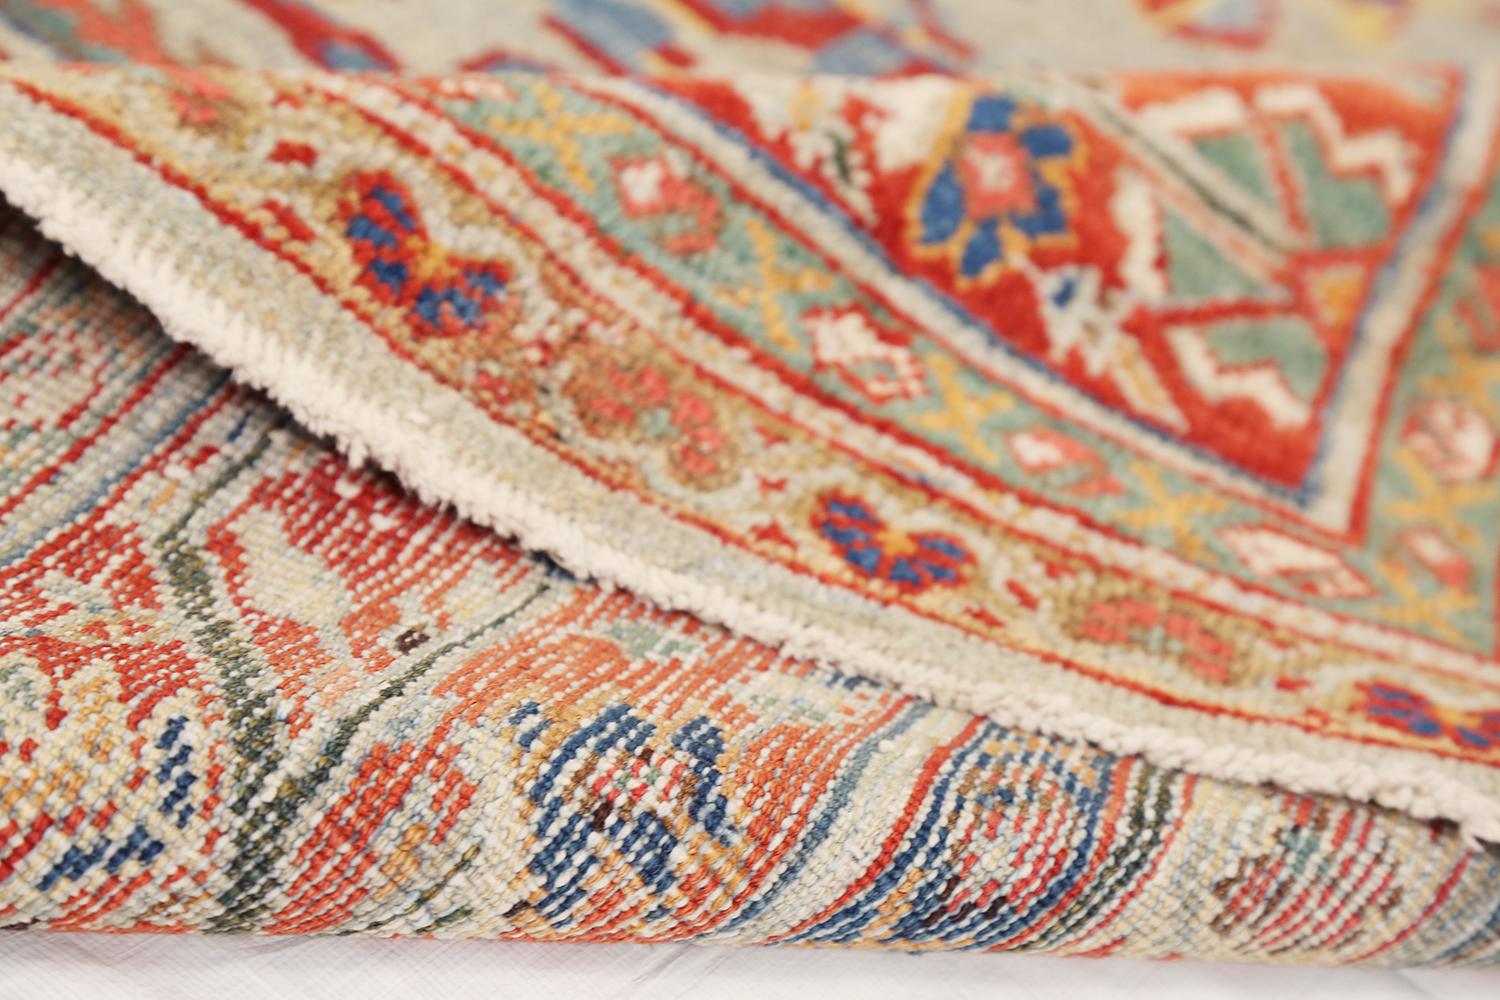 Antique Persian Sultanabad Rug with Blue and Red Botanical Motifs In Excellent Condition For Sale In Dallas, TX